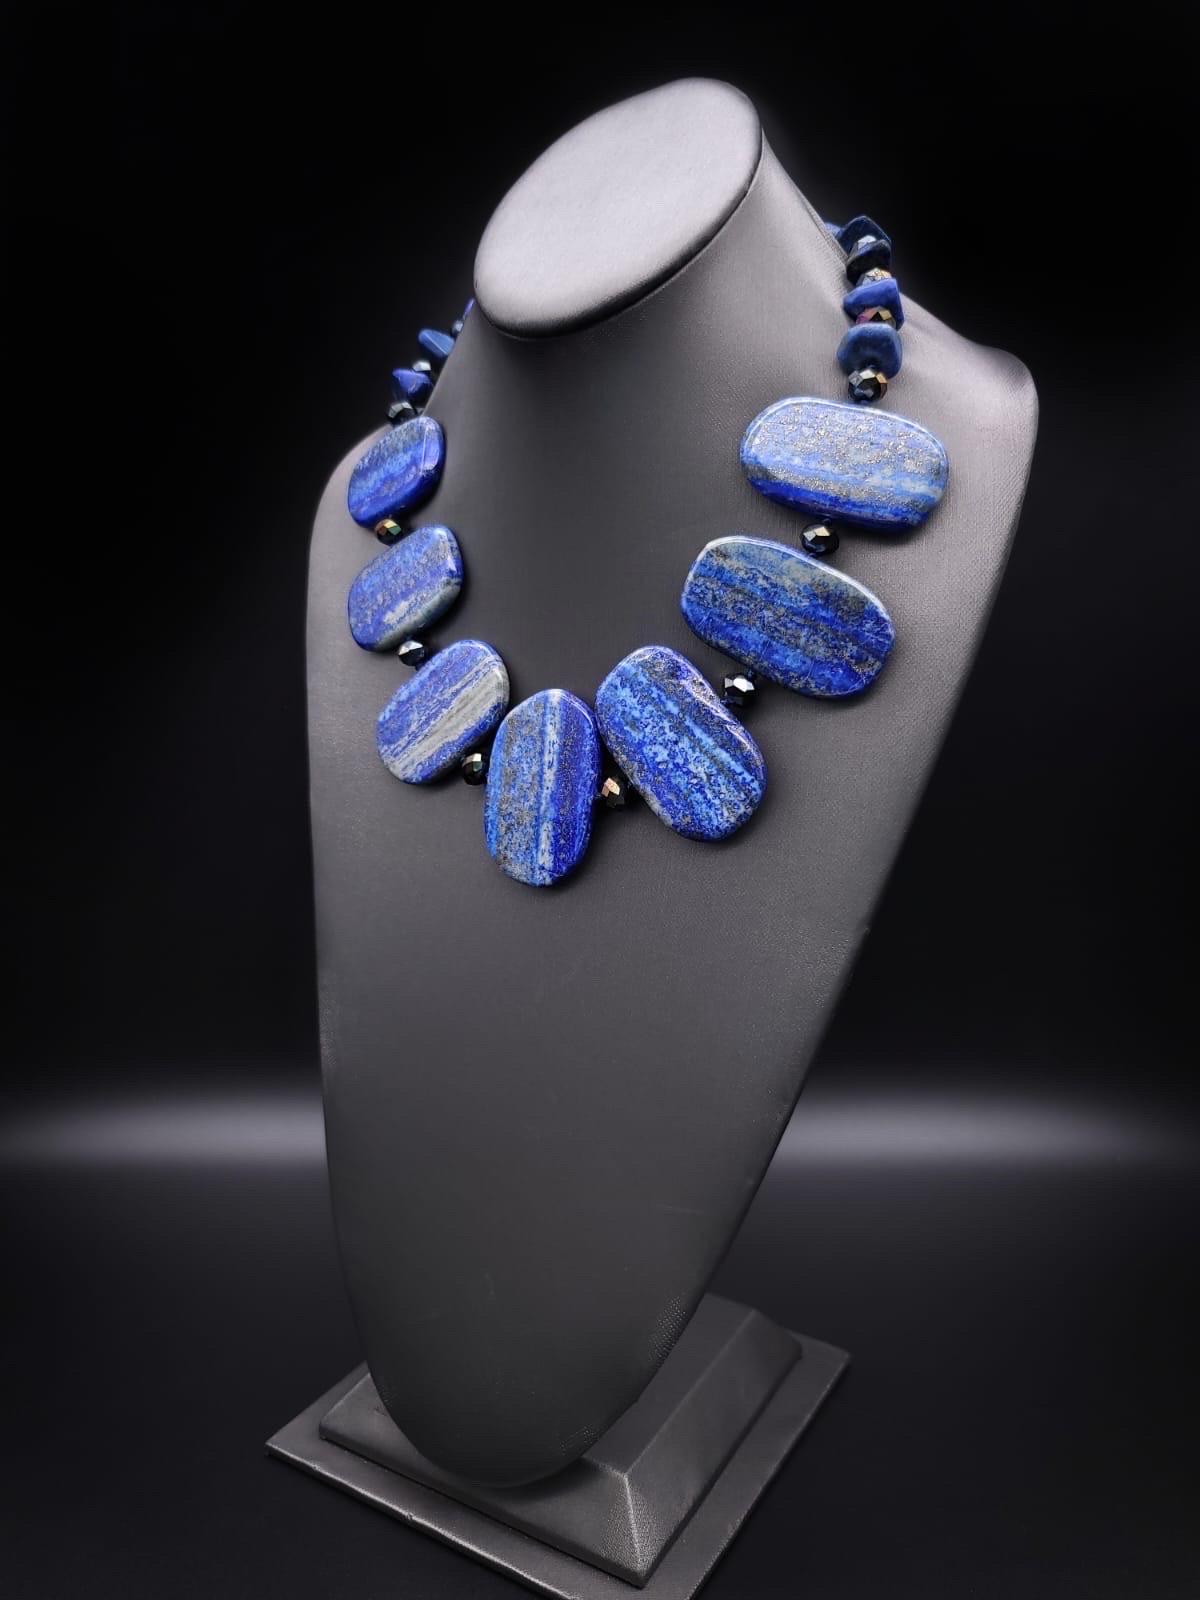 One-of-a-Kind

Spectacular Lapis lazuli necklace from the ancient mines of Afghanistan  The plates are hand-polished in the modern way each measuring approximately 2’x1’ center a necklace of traditionally cut Lapis beads. Because of the luminous